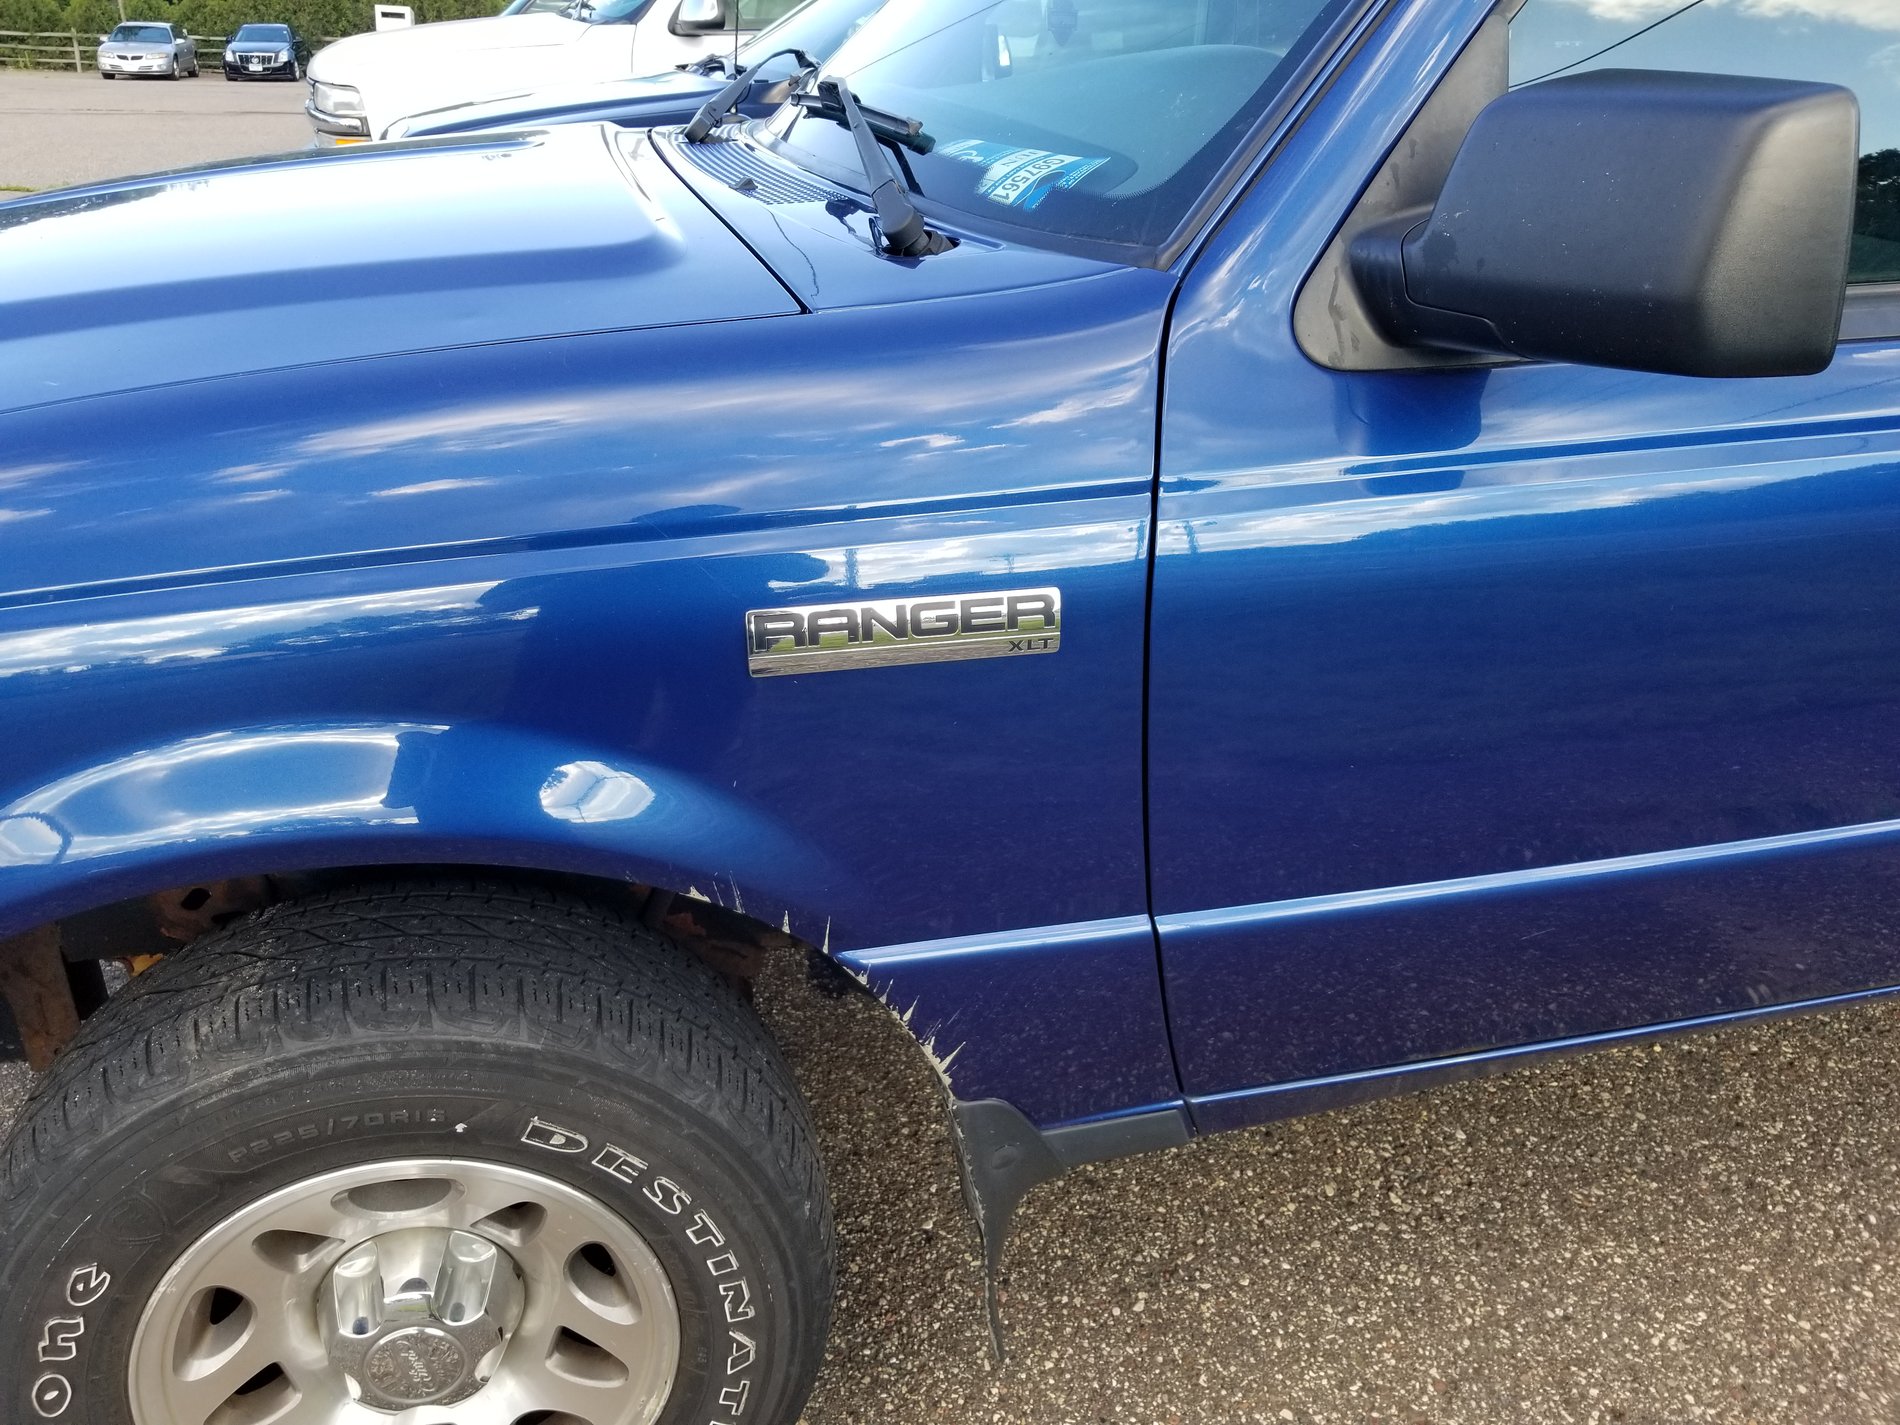 Ford Ranger Look at my Ranger parked next to stuff 20190717_183519